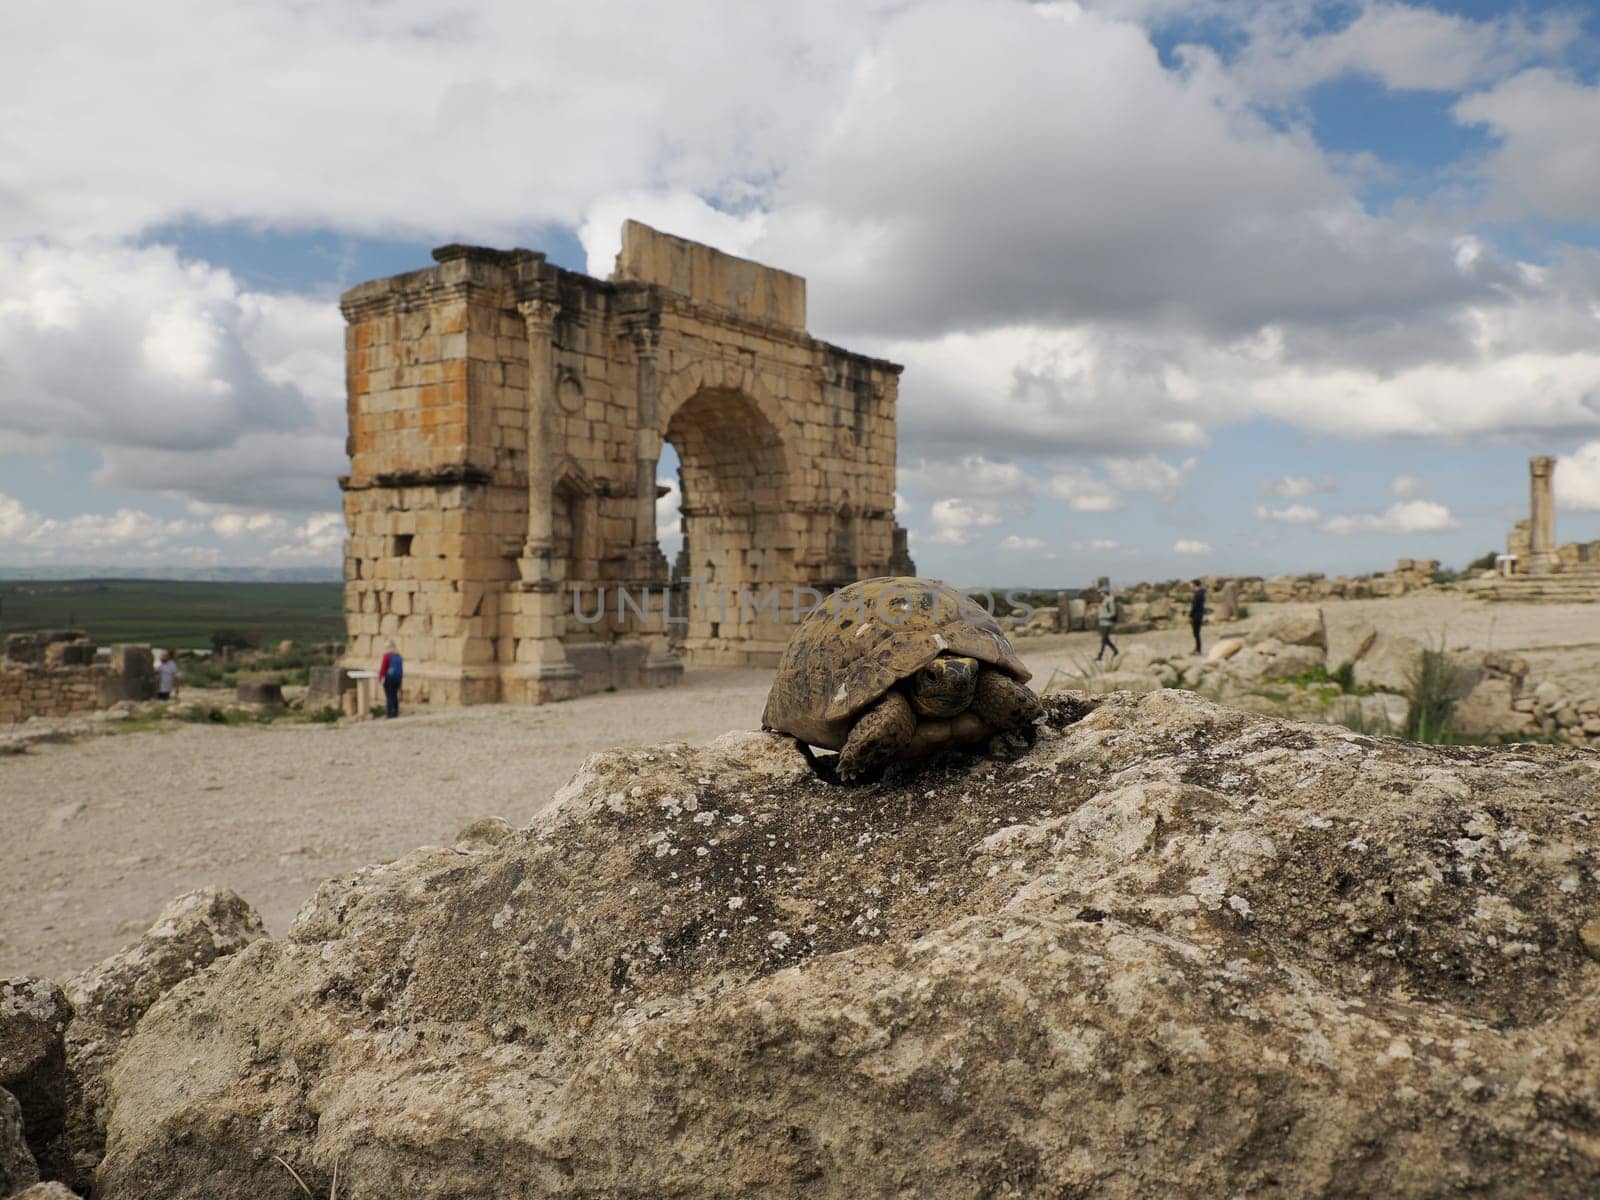 turtle ay Volubilis Roman ruins in Morocco- Best-preserved Roman ruins located between the Imperial Cities of Fez and Meknes on a fertile plain surrounded by wheat fields.